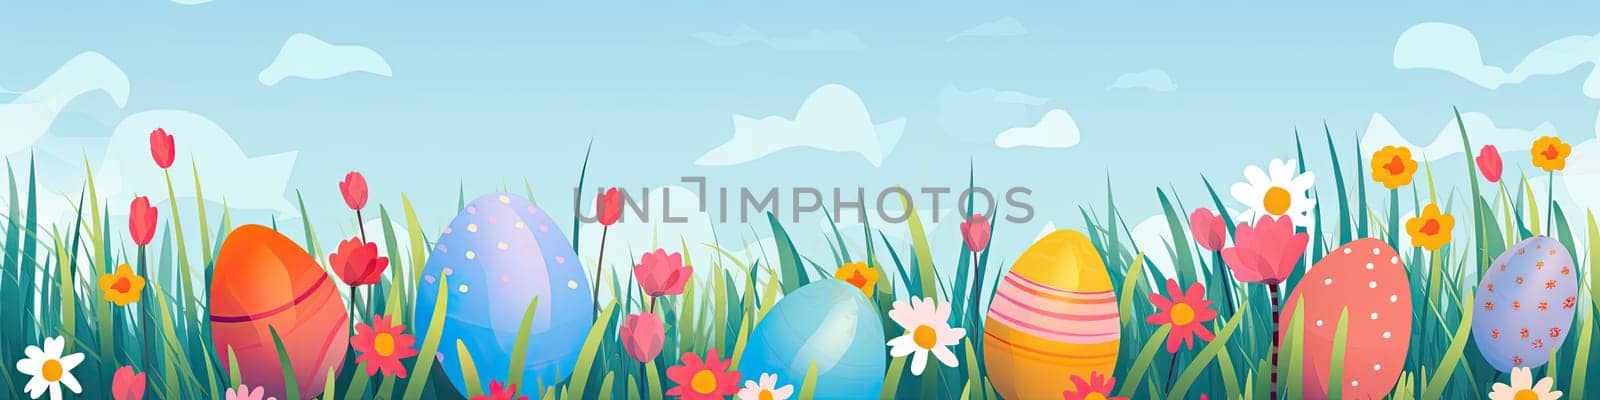 Flat cartoonish style easter banner with a colorful eggs, grass and flowers, with empty copy space by Kadula